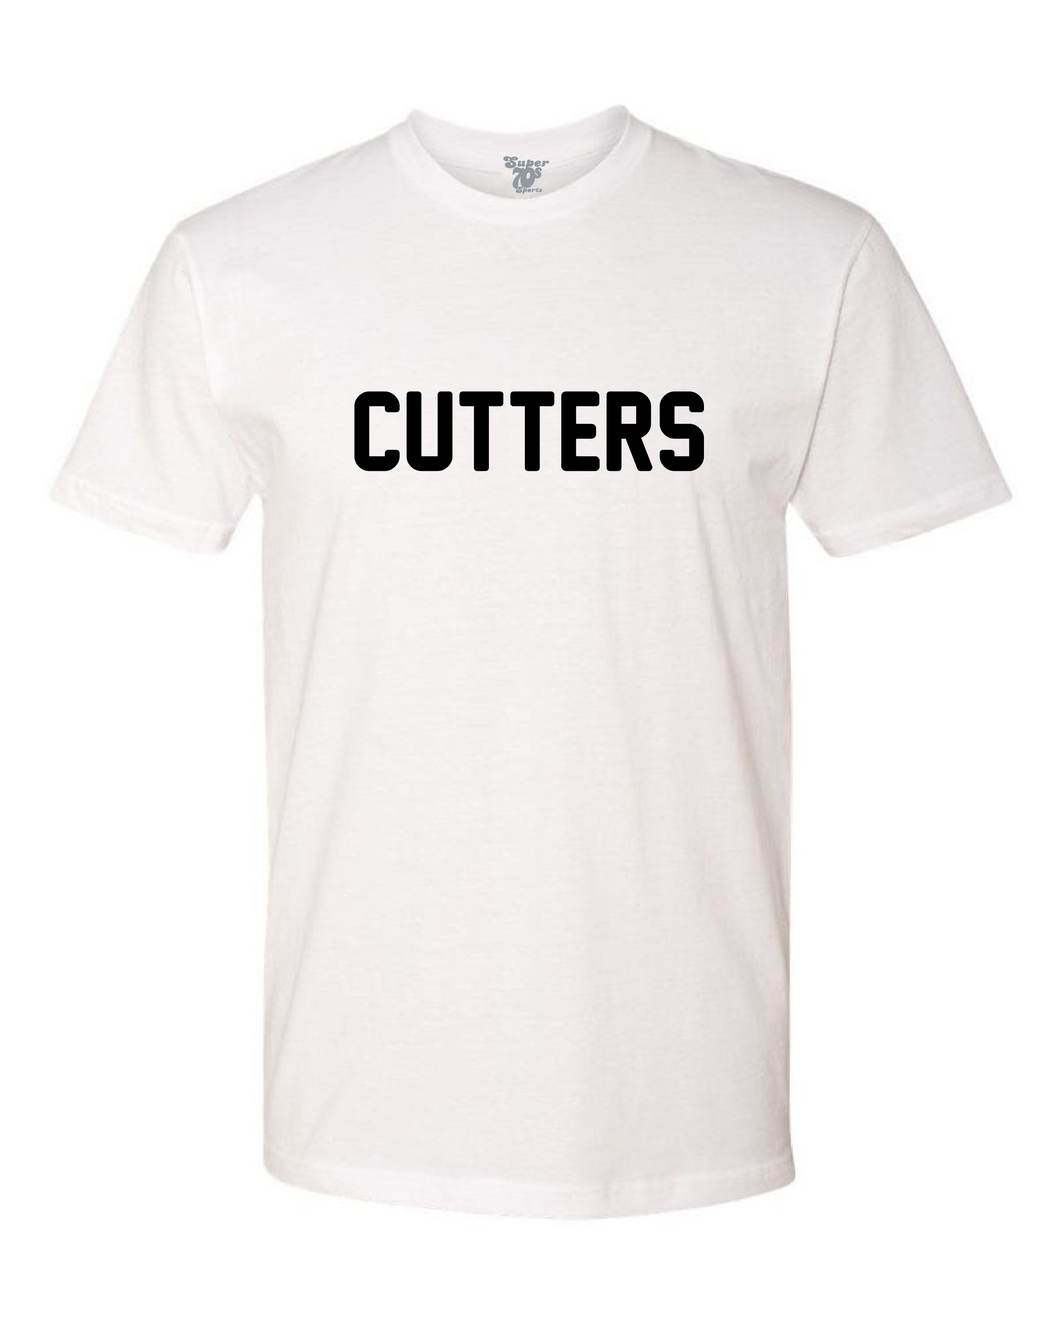 Cutters Tee